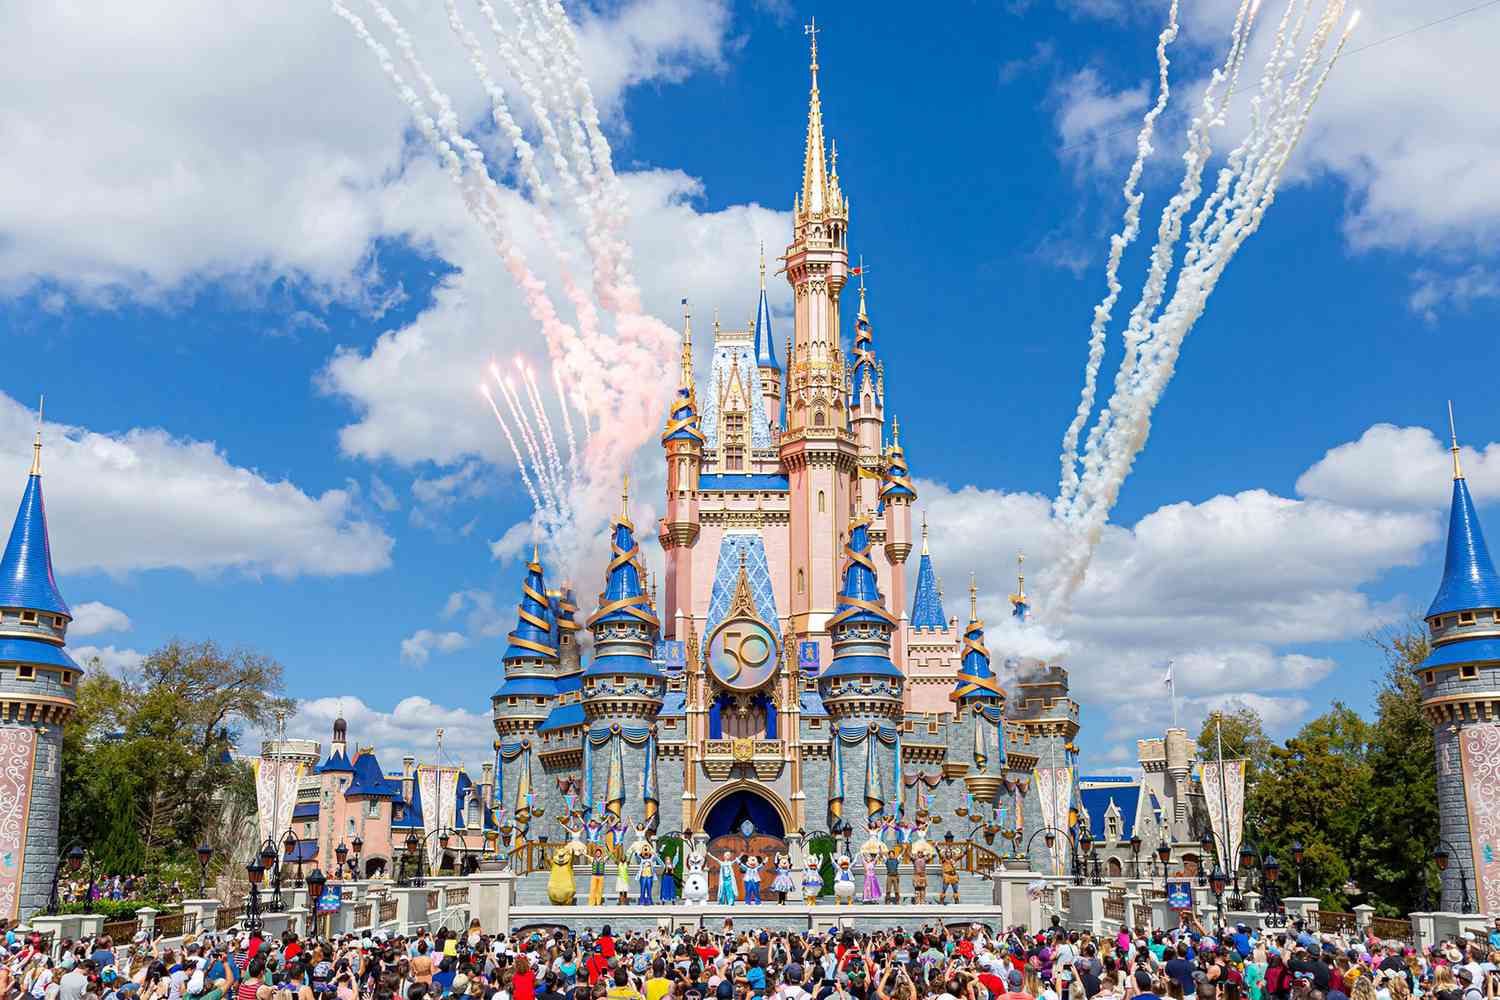 Five popular amusement parks in the world